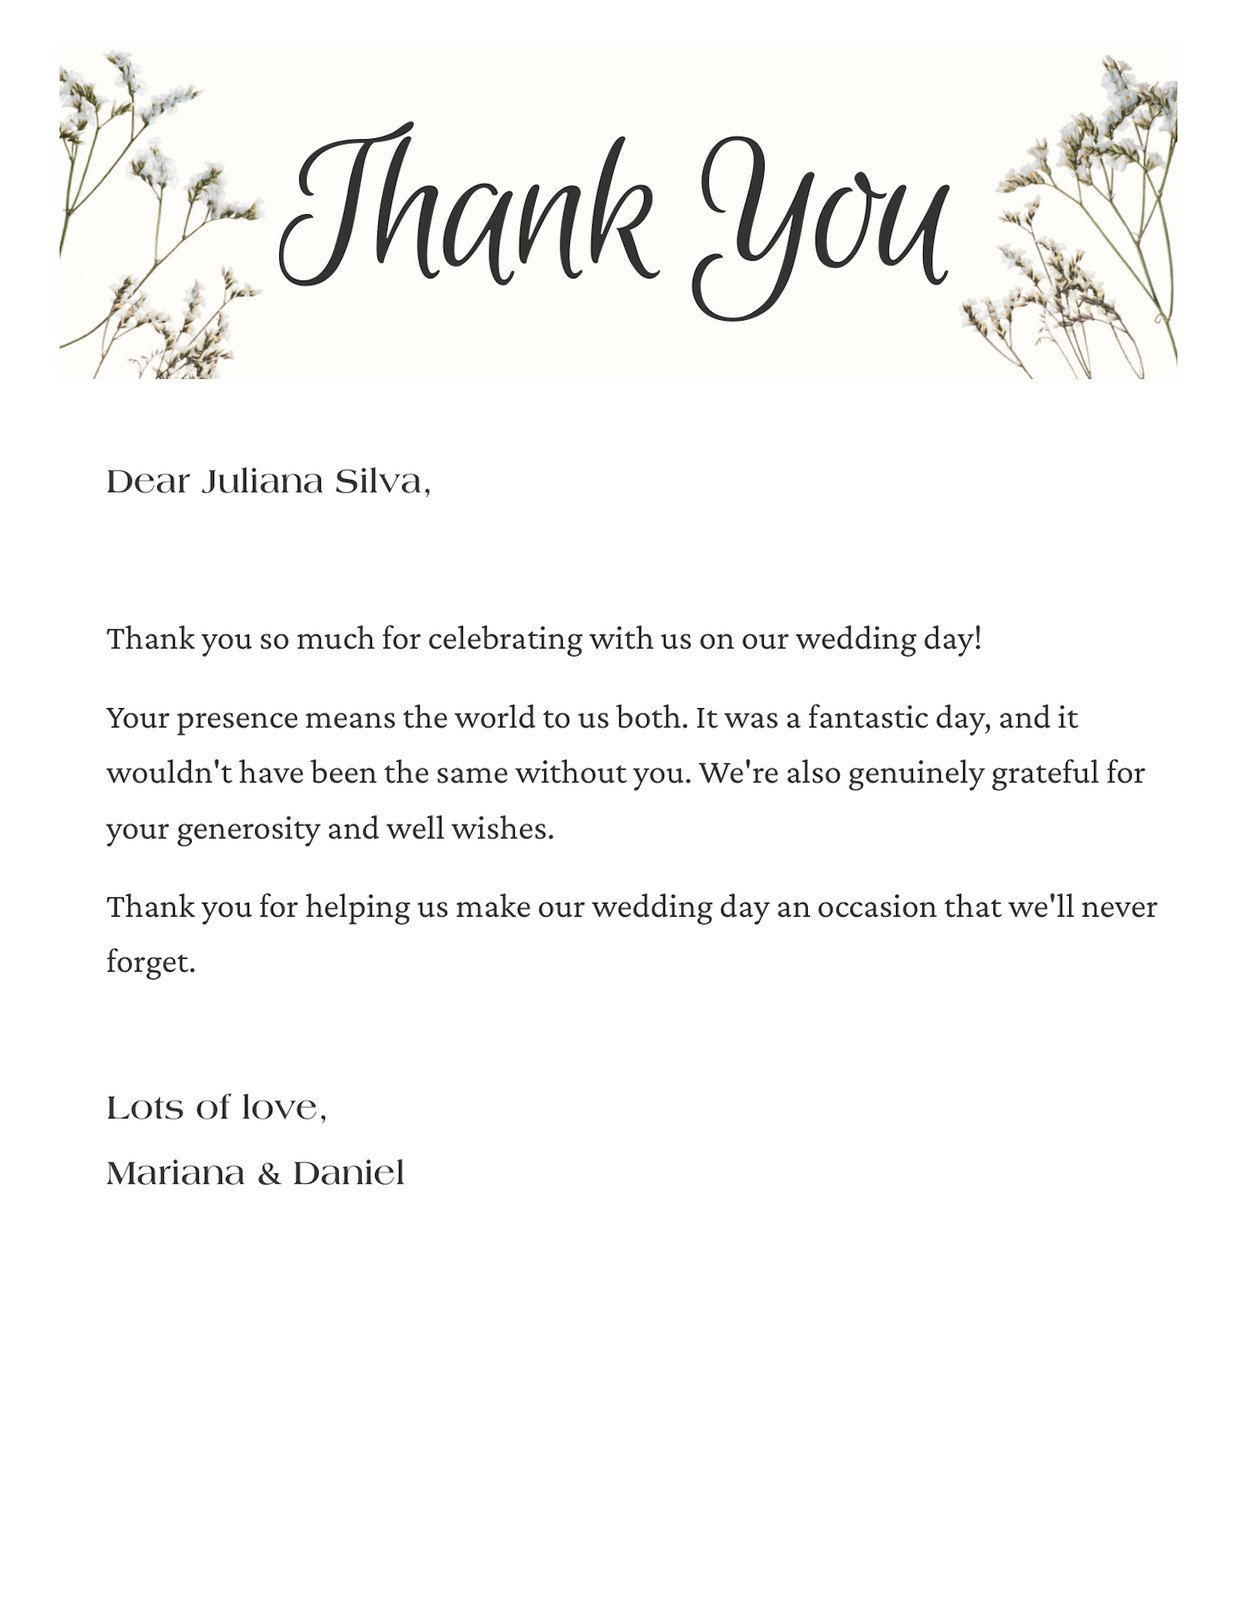 Wedding Thank You Letter Doc in White Beige Simple Elegant Style